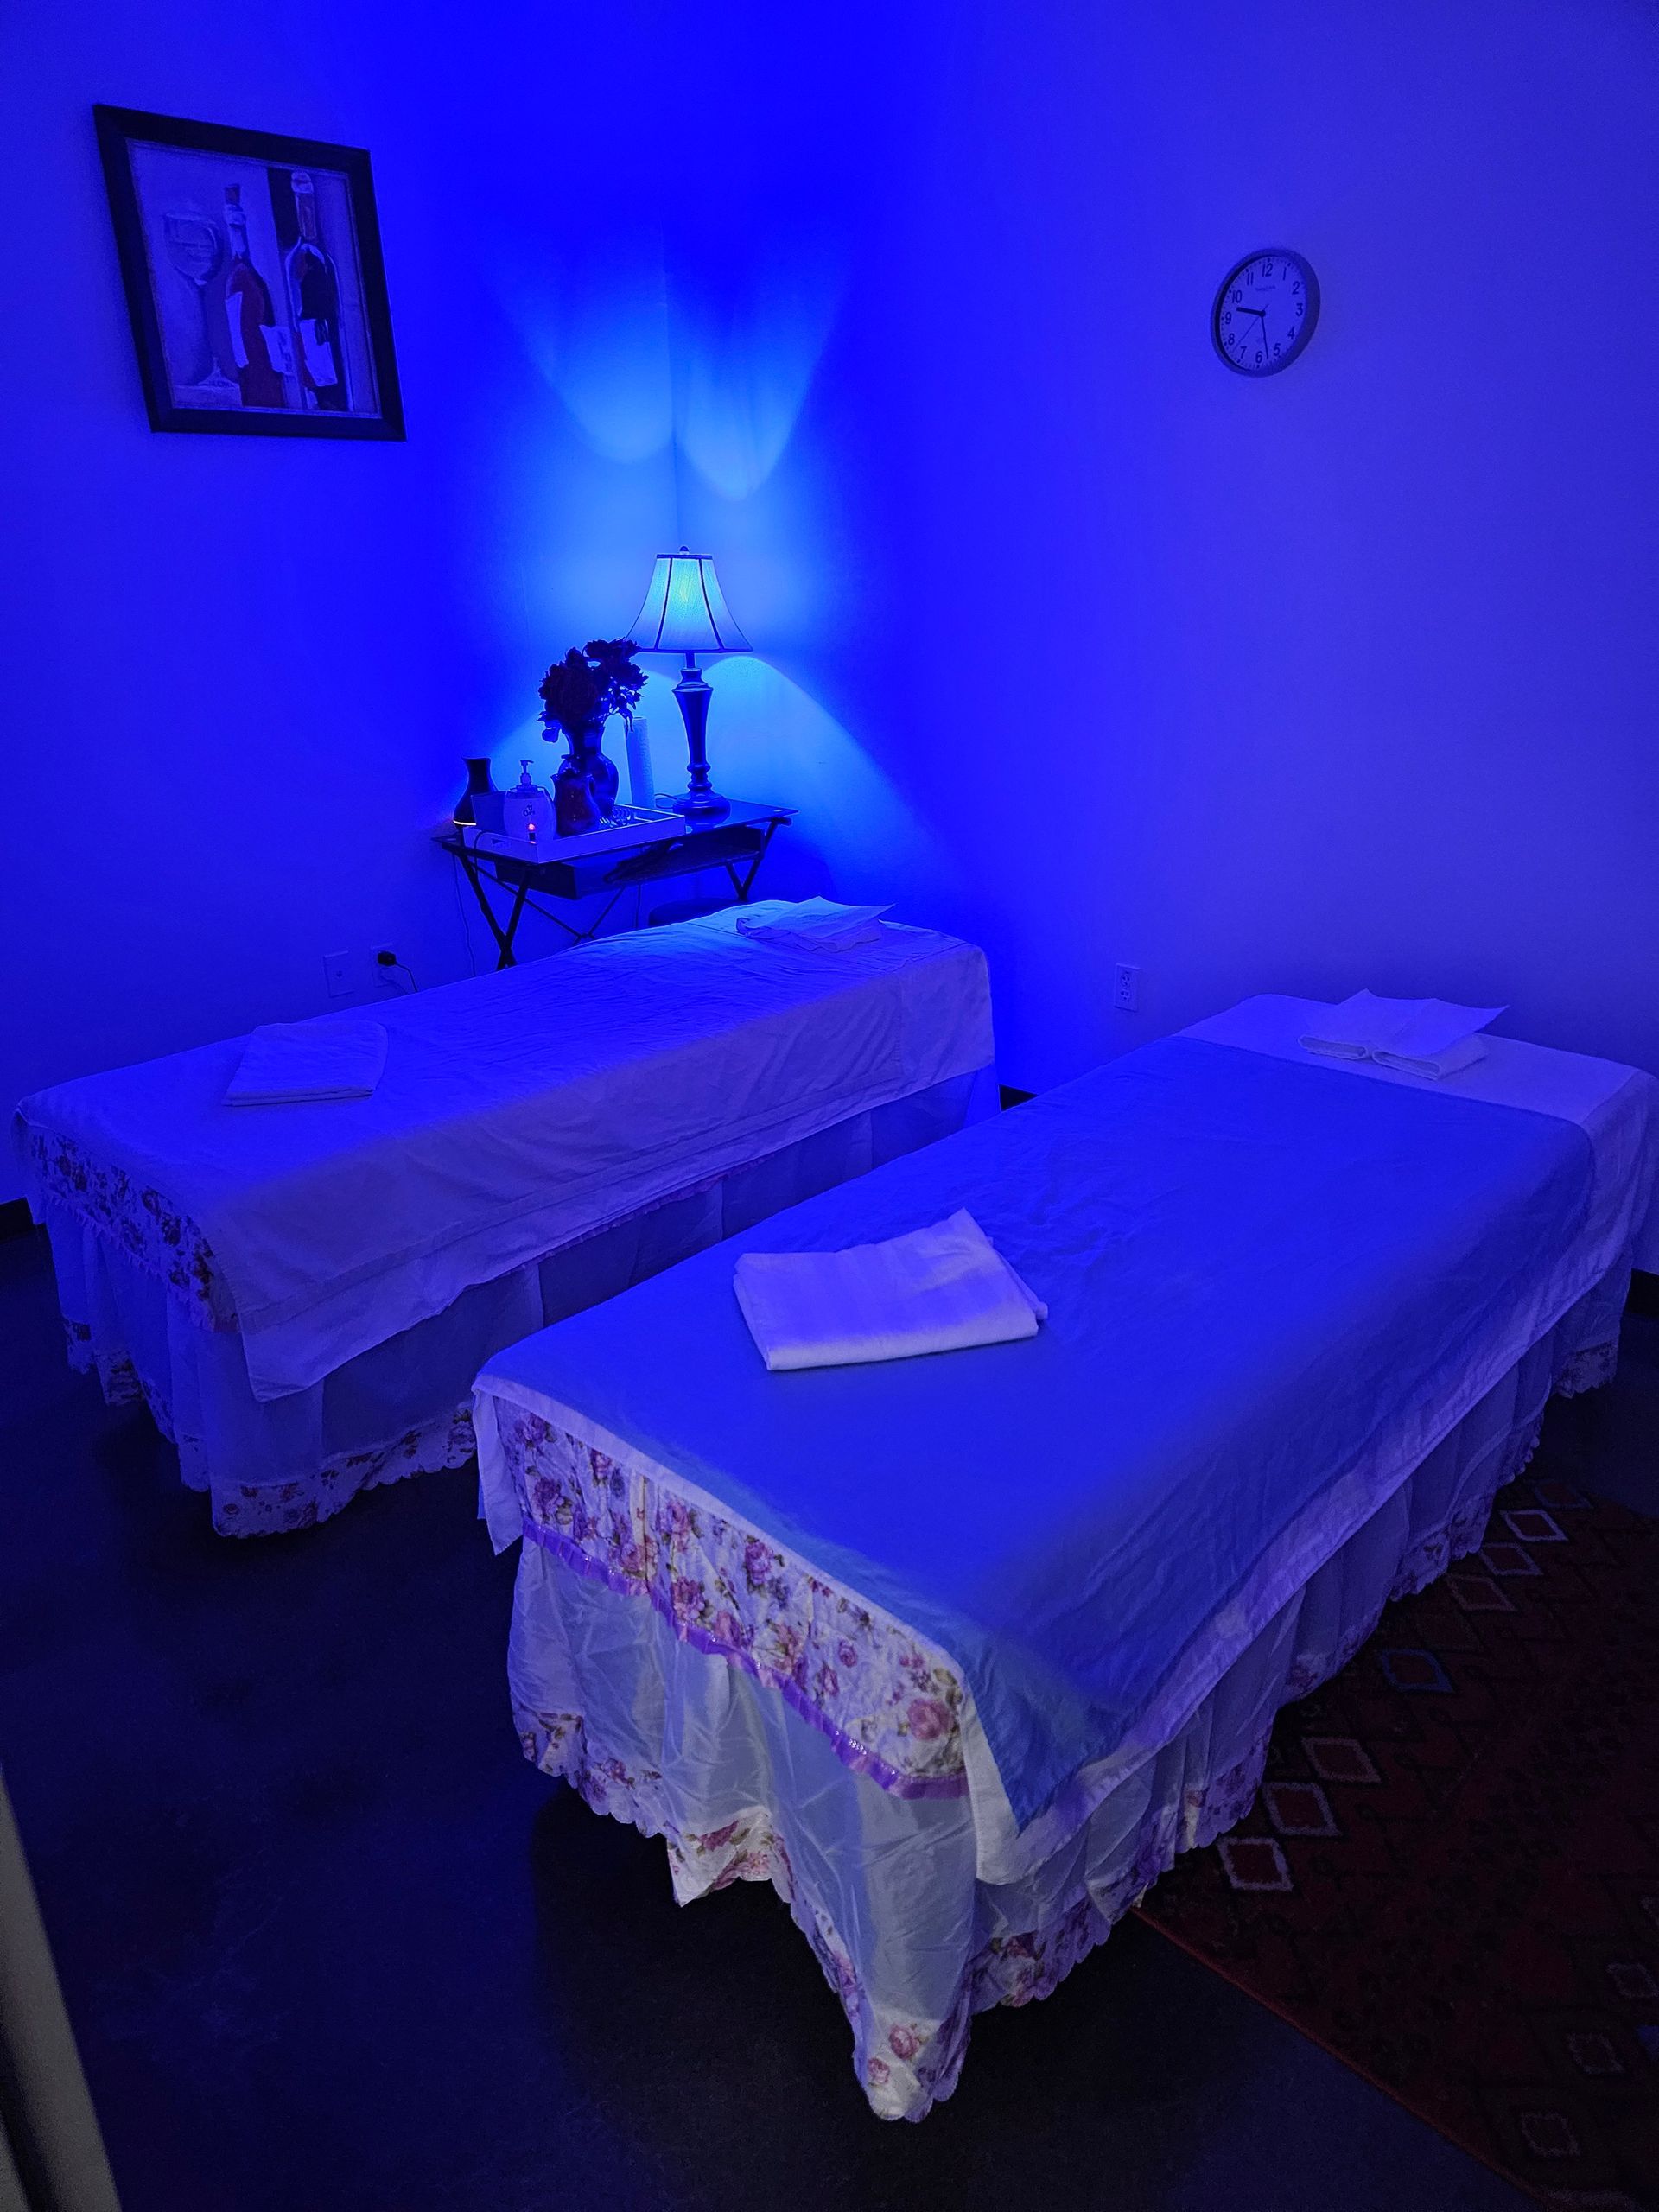 Two massage beds in a room with blue lights